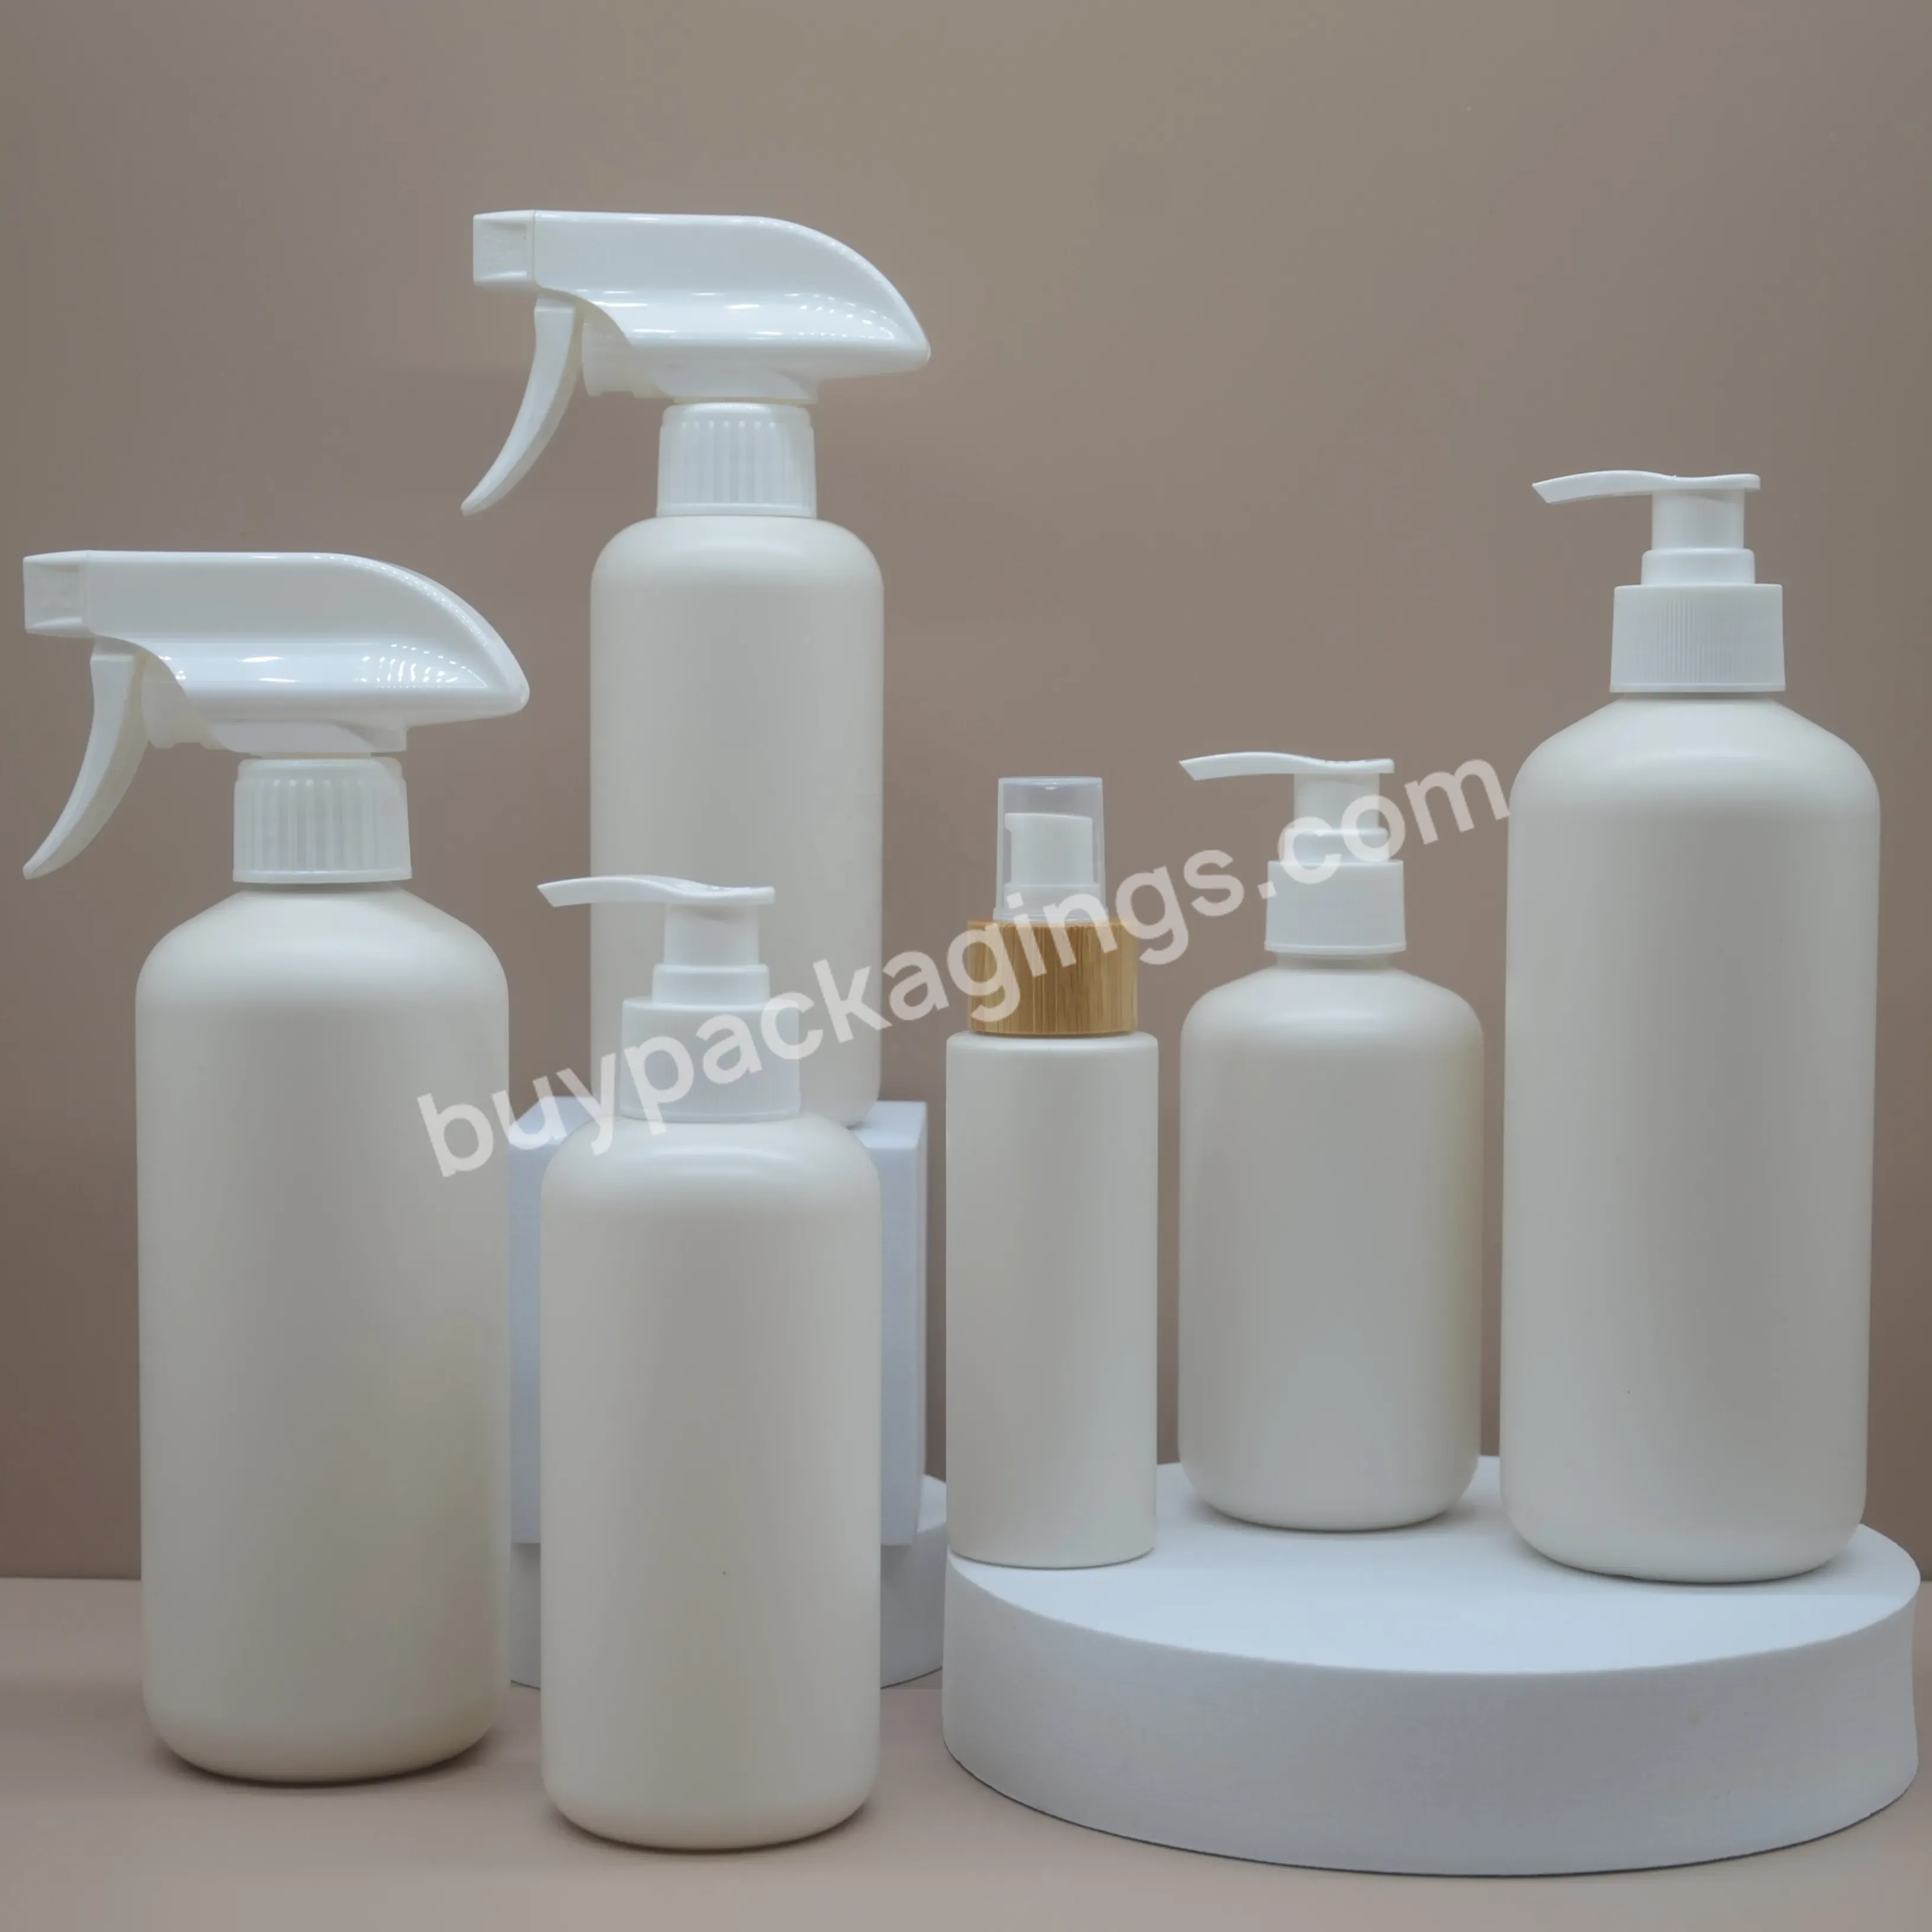 Best Selling 100% Biodegradable Lotion Replacement Bottle Recyclable Plastic Bottle Body Wash Shampoo With Lotion Pump Bottle - Buy 100% Biodegradable Lotion Replacement Bottle,Recyclable Plastic Bottle,Body Wash Shampoo Lotion Pump Bottle.